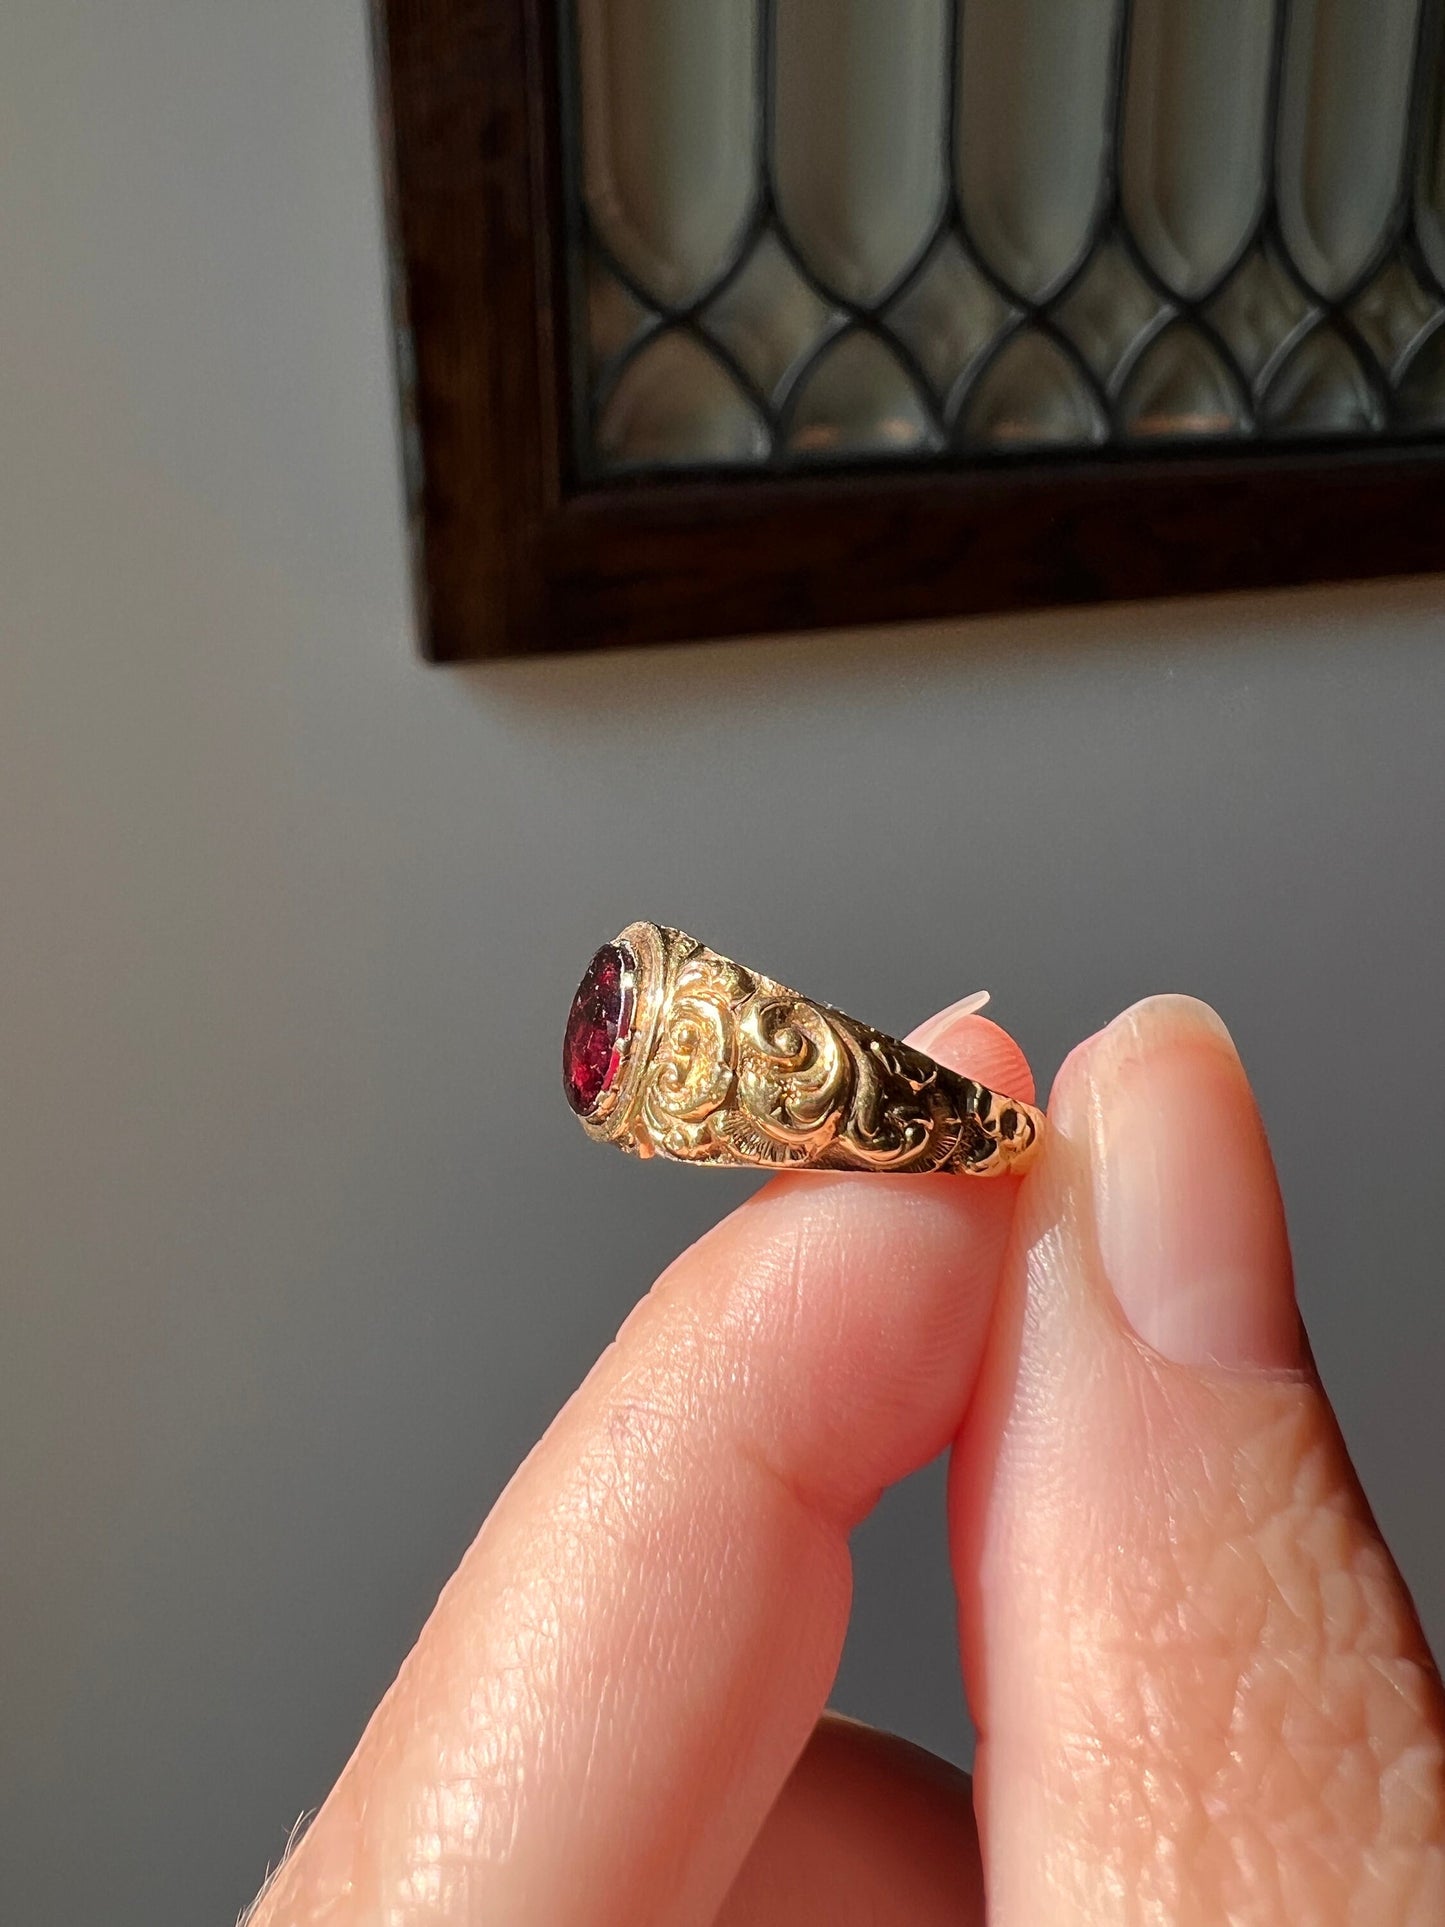 ORNATE Red GARNET Deeply Embossed Antique Ring 15k Gold Victorian Stacker Romantic Gift Shell Swirl Band Georgian Collet Set Oval Not 14k